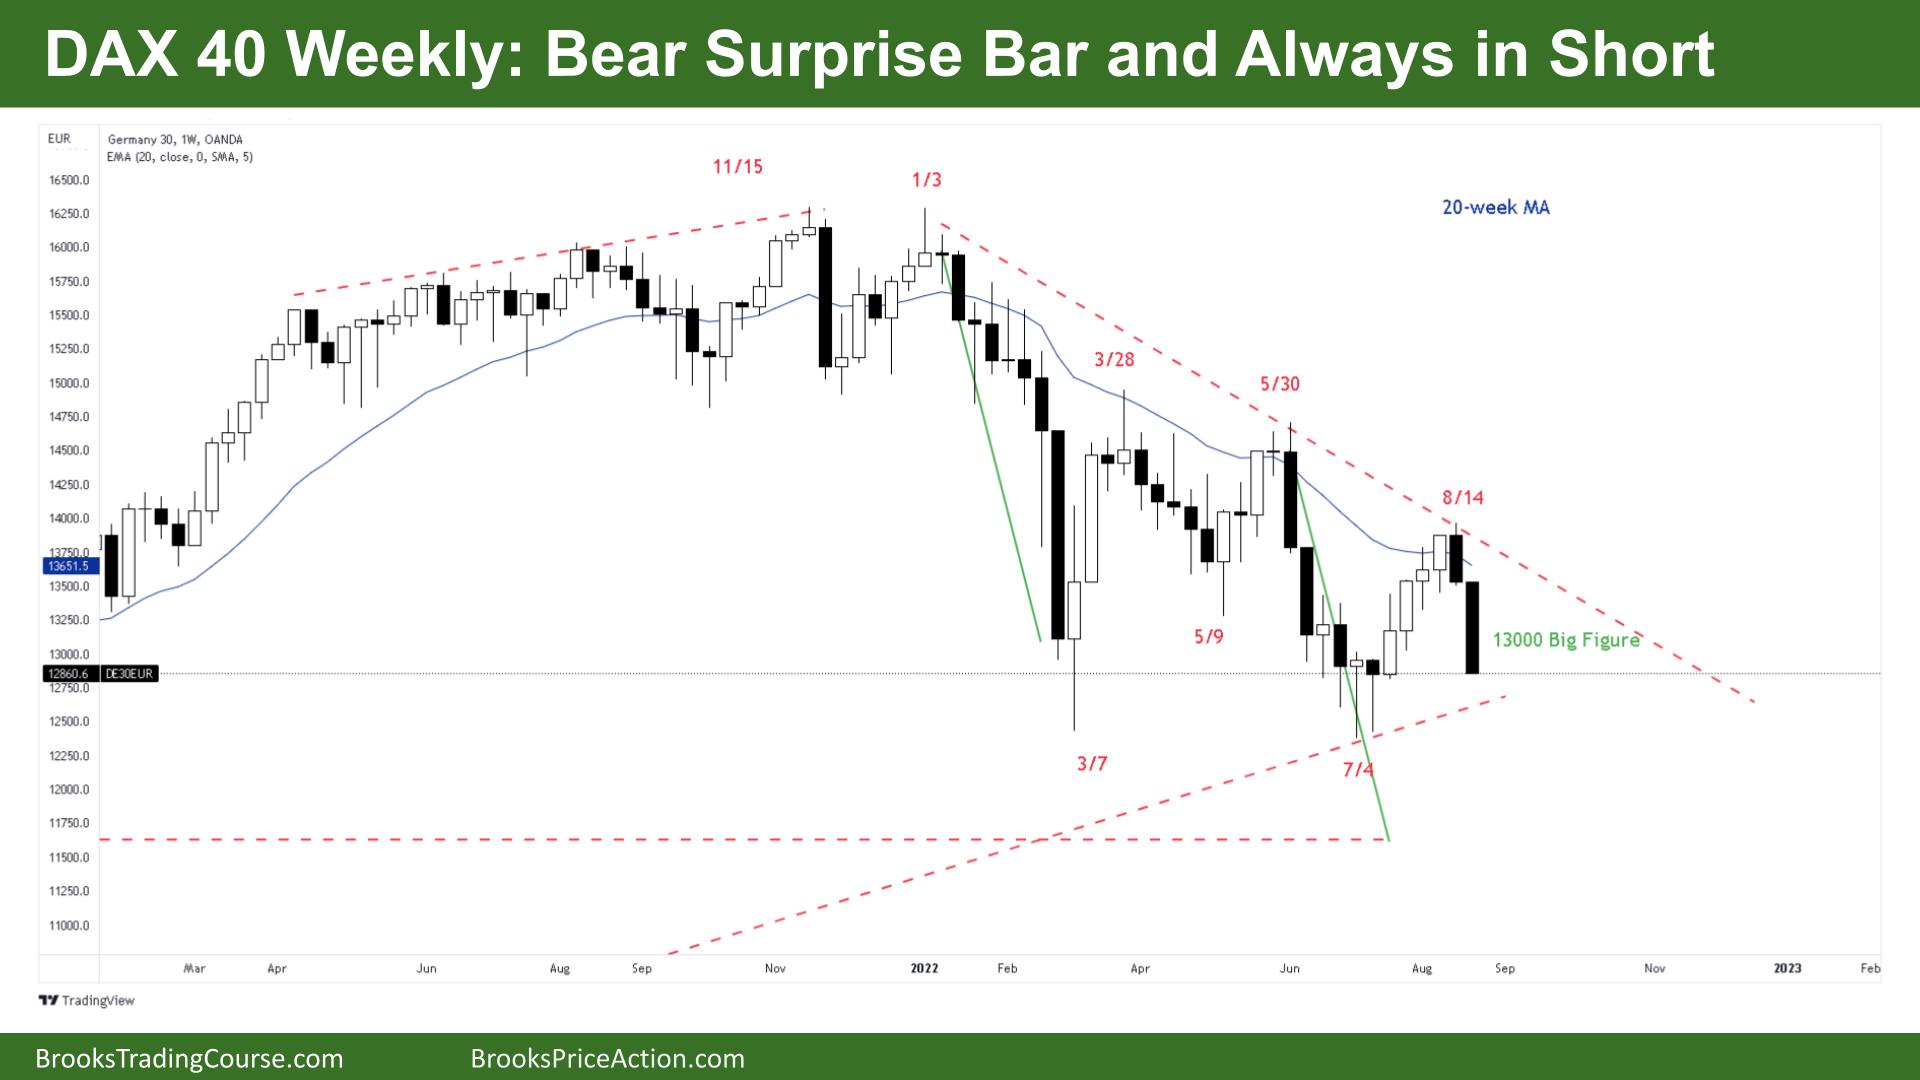 DAX 40 Bear Surprise Bar and Always in Short